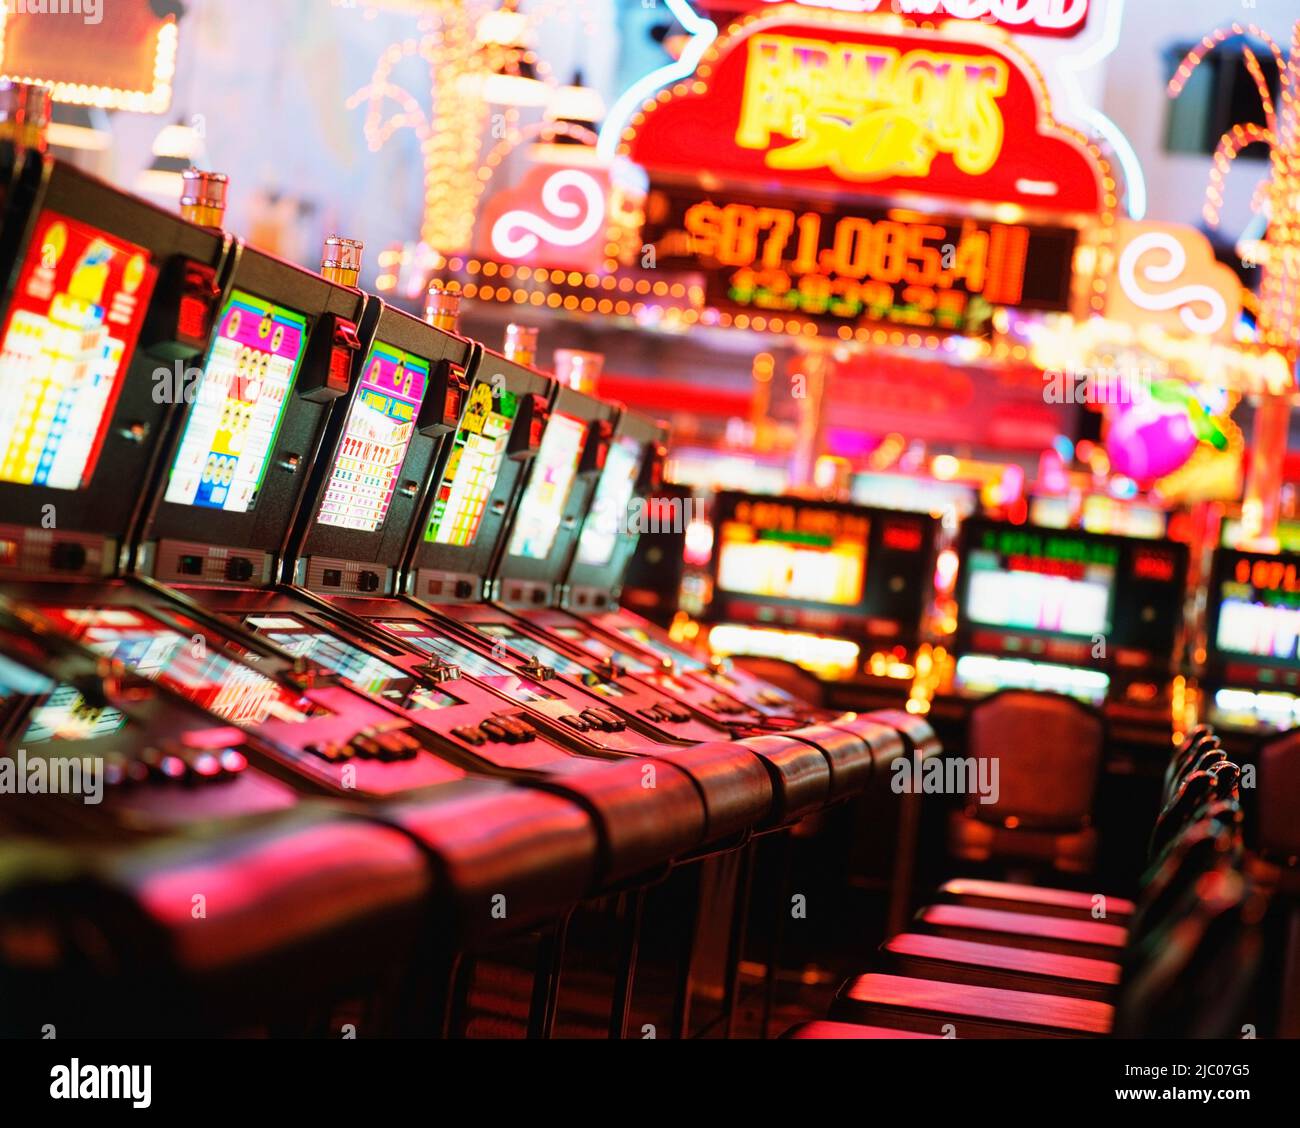 Row of slot machines in a casino, Hollywood Casino Bay St. Louis, Bay Saint Louis, Hancock County, Mississippi, USA Stock Photo